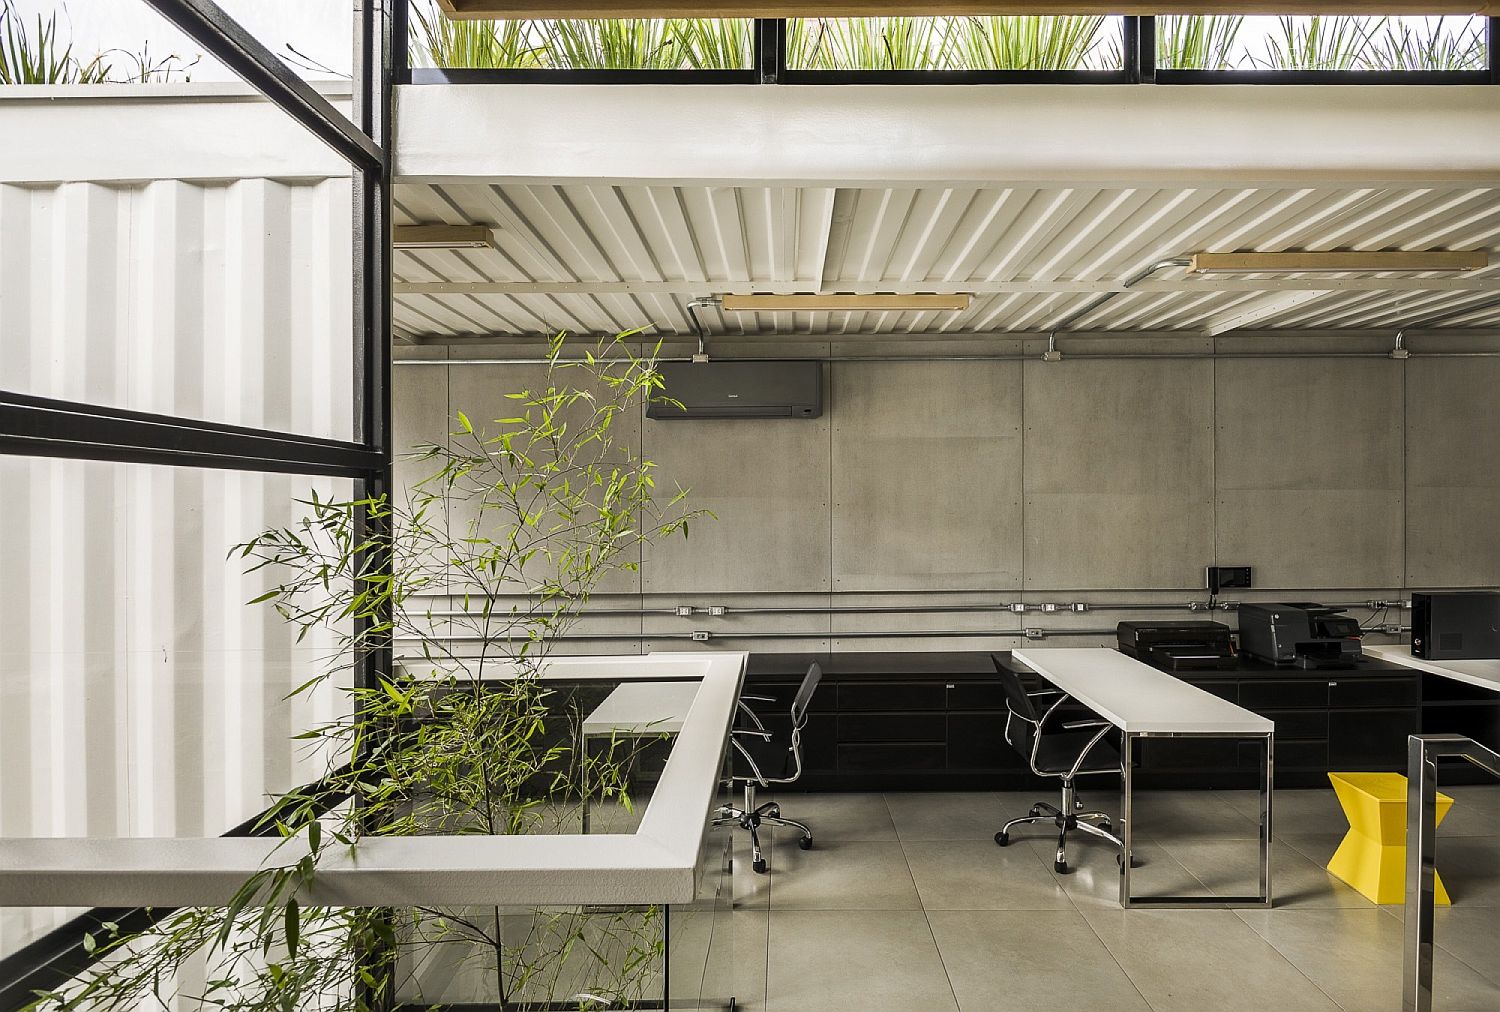 Innovative office design using shipping containers and a green roof